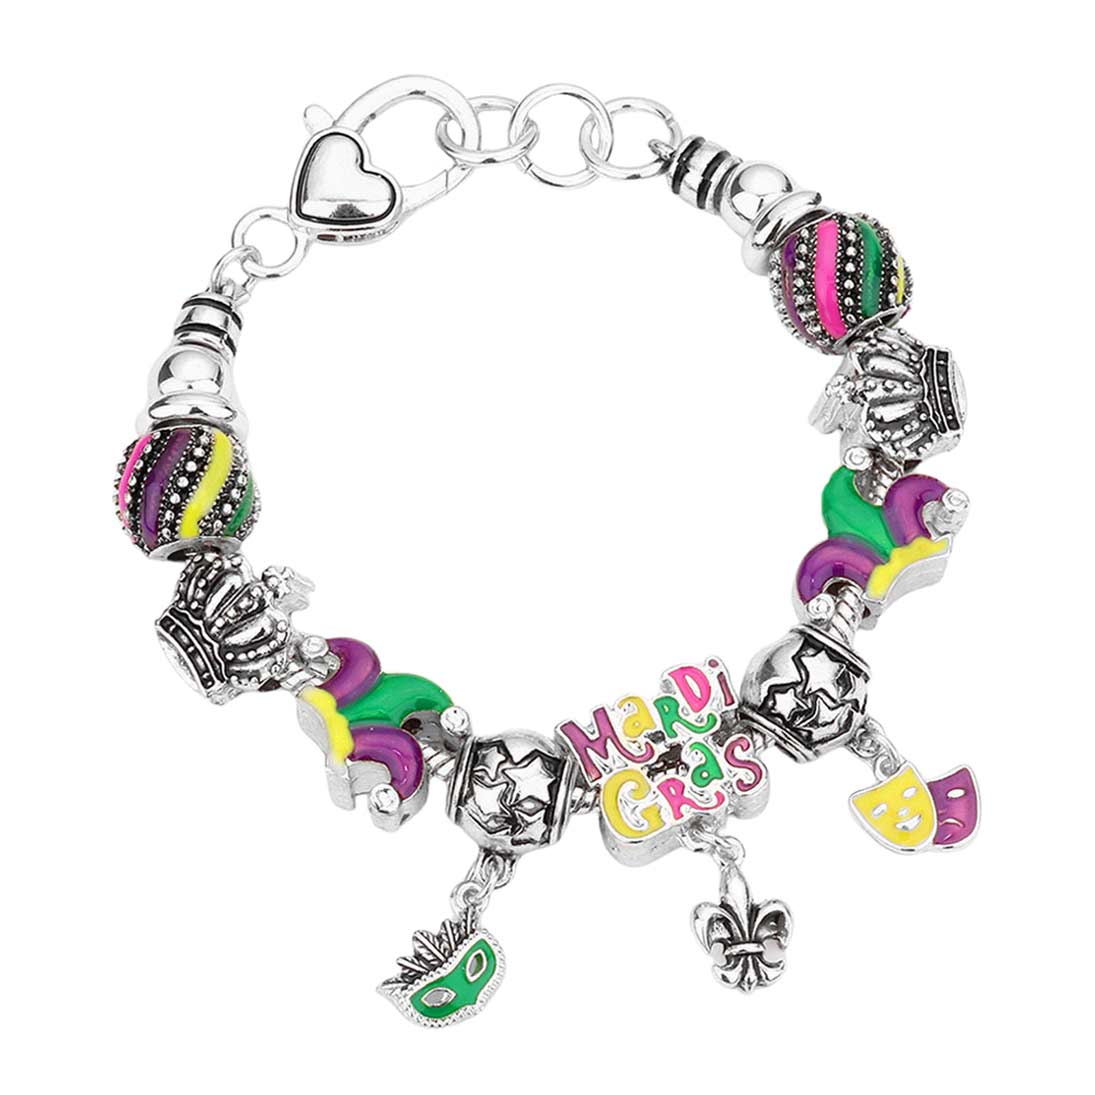 Antique Silver Mardi Grass Multi Bead Bracelet, beautifully crafted design adds a gorgeous glow to any outfit. Put on a pop of color to complete your ensemble stylishly with this multi-bead bracelet. Perfect for adding just the right amount of shimmer & shine and a touch of class to special events.